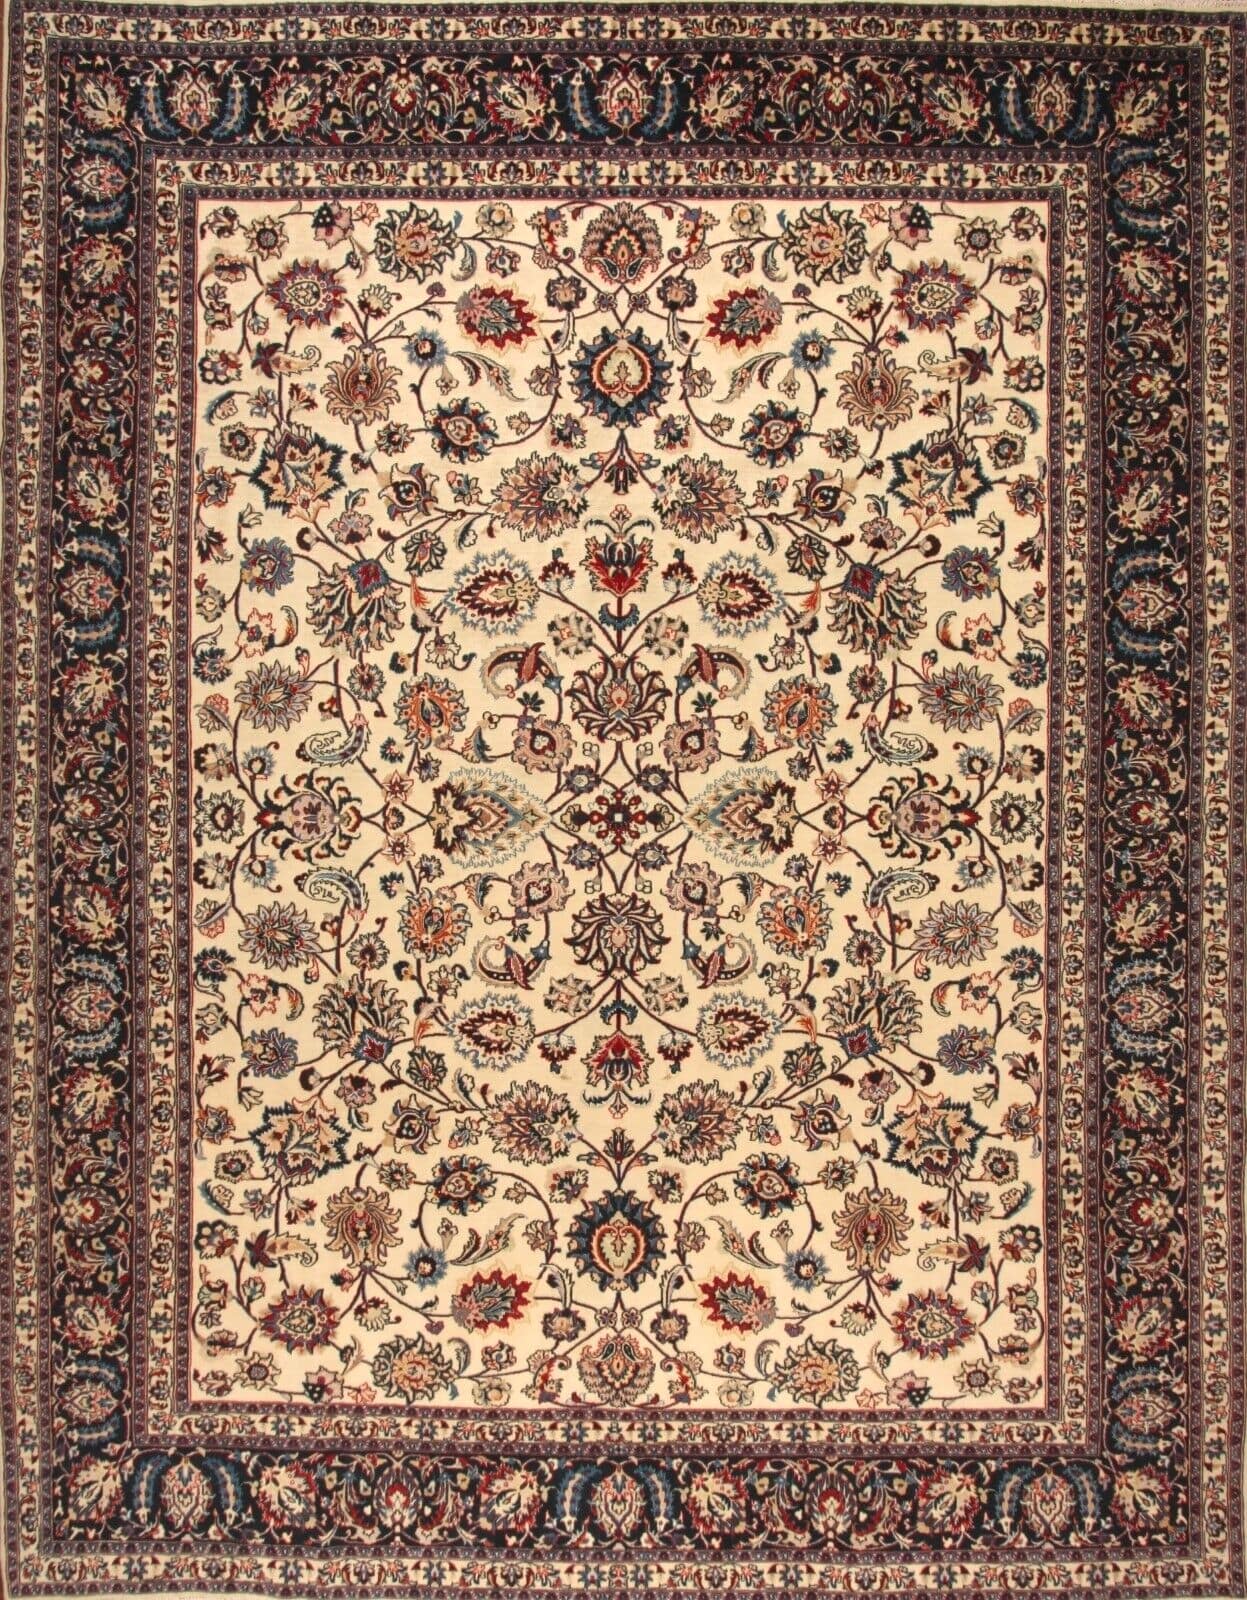 Handmade Contemporary Persian Style Tabriz Rug in a luxurious living room setting